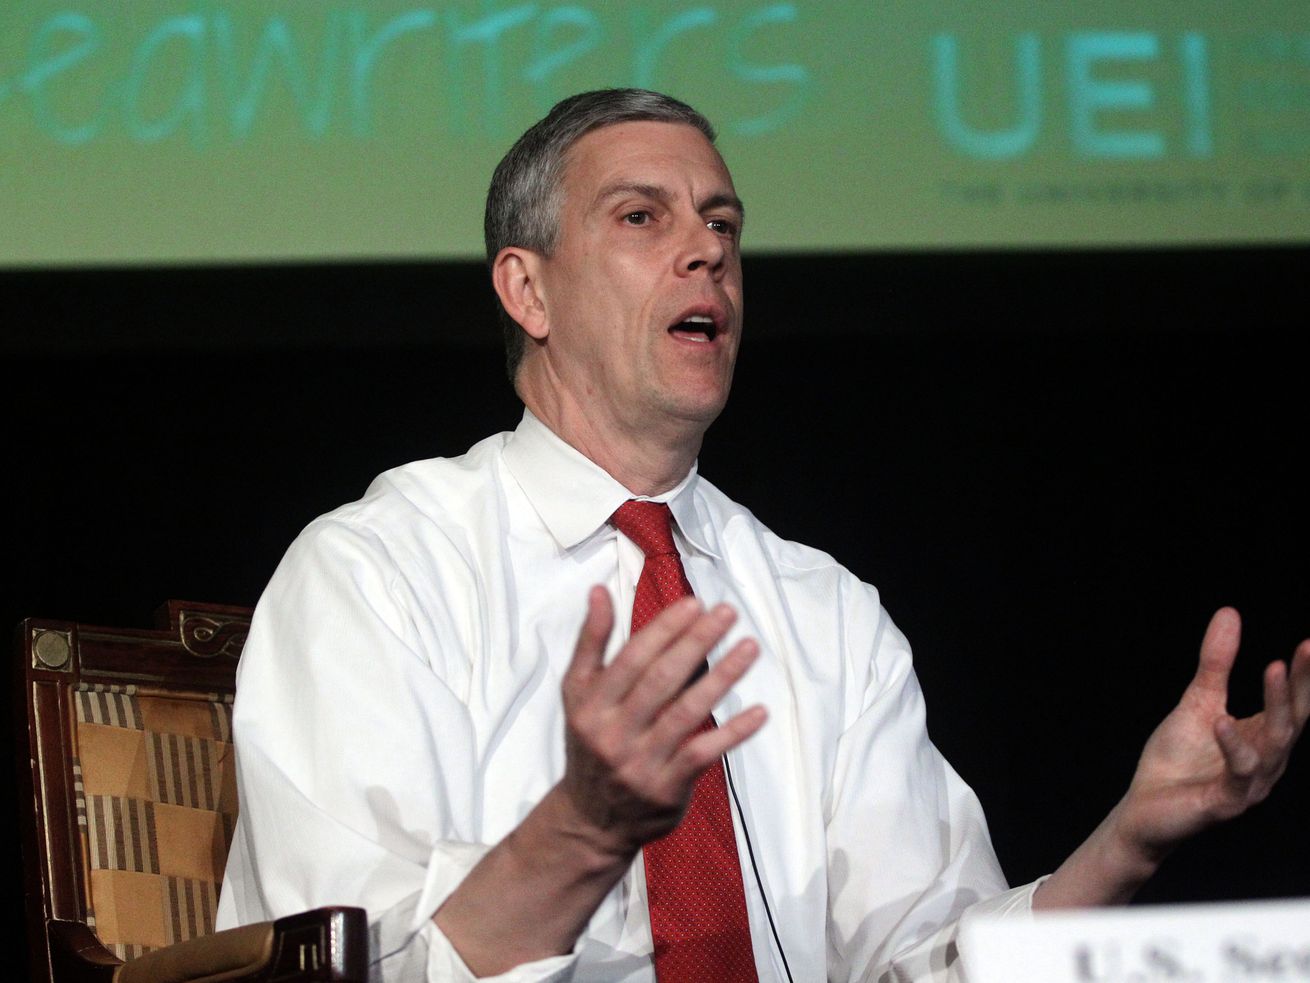 Former CPS chief and U.S. education secretary Arne Duncan now has a nonprofit that works with at-risk youth.